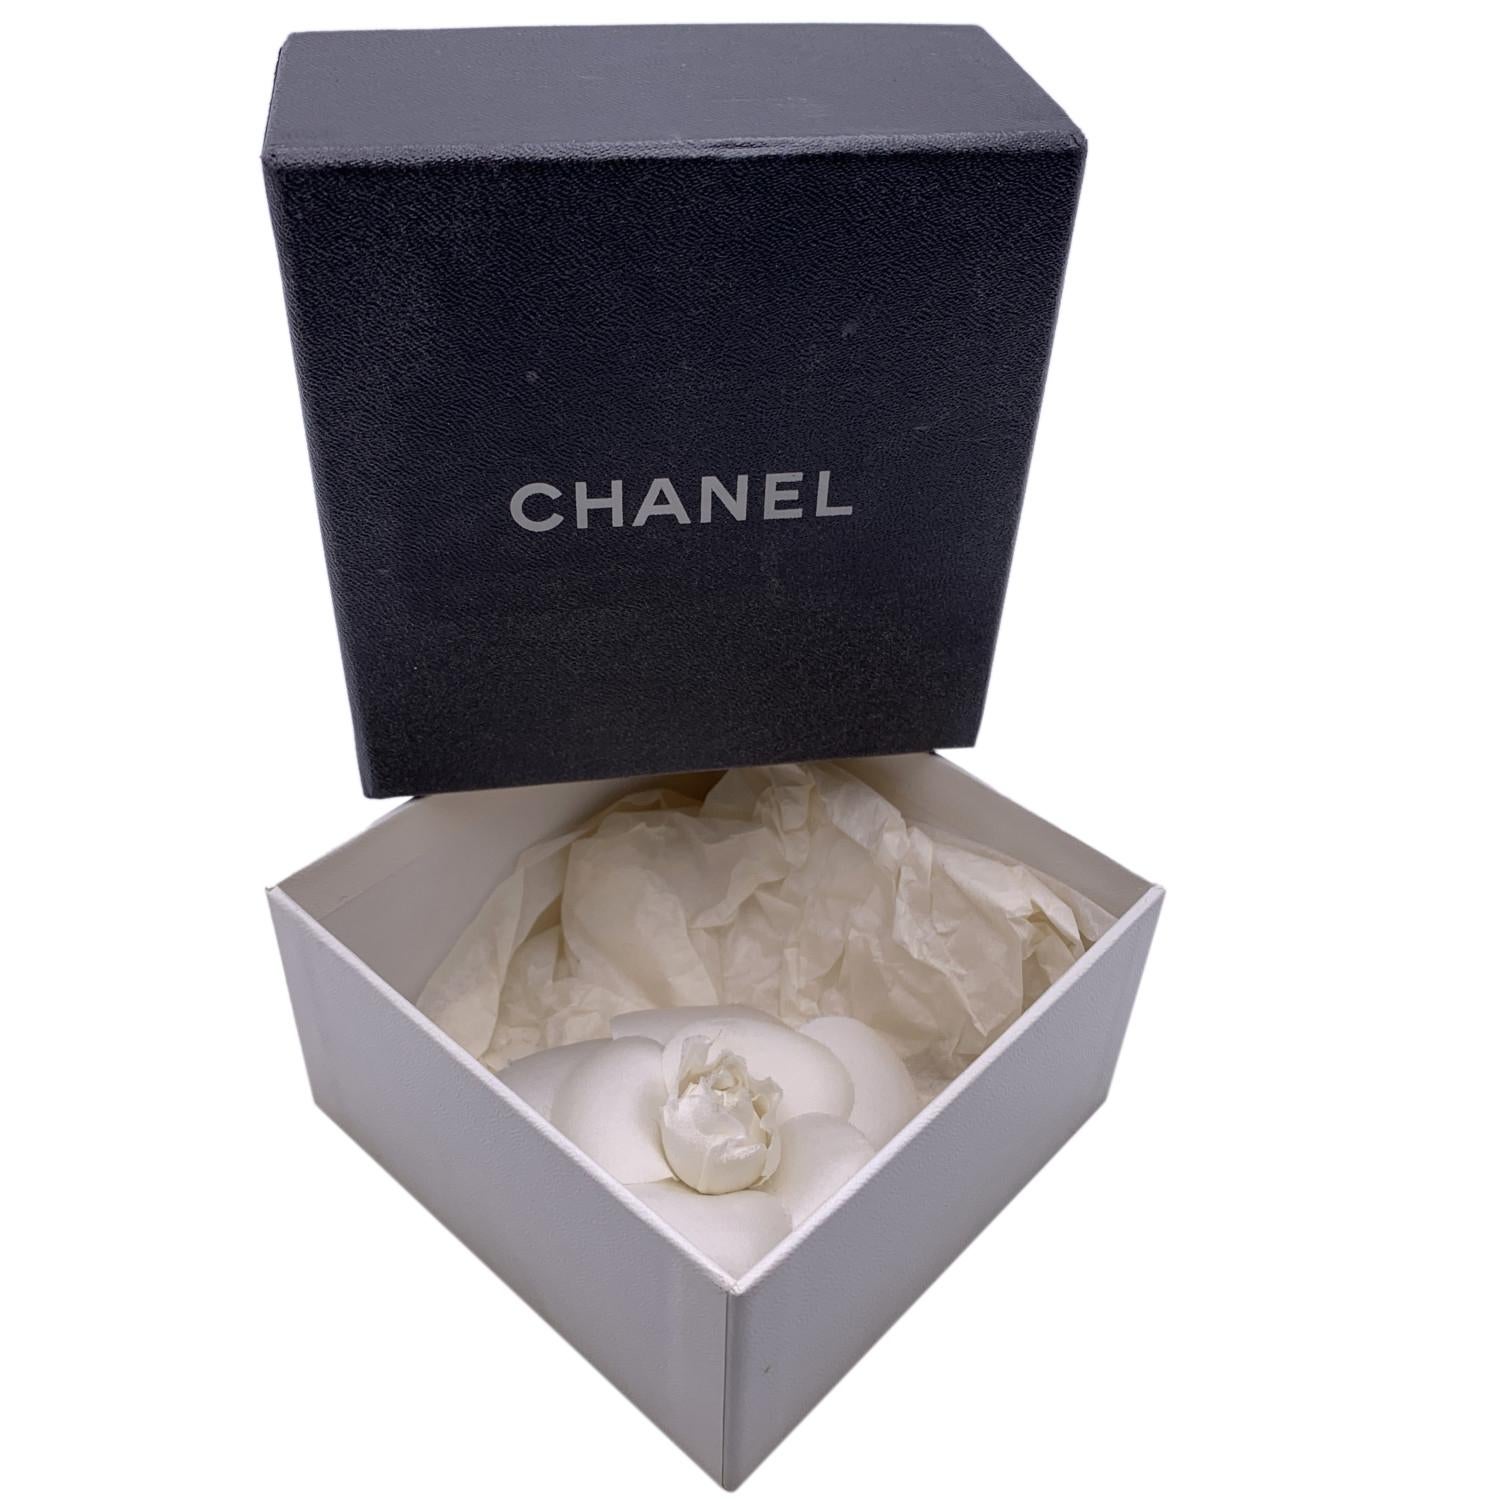 Chanel Vintage Camelia Camellia Flower Pin Brooch. White silk petals. Safety pin closure 'CHANEL - CC - Made in France' oval tab on the back

Condition

A - GOOD

Gently used. A very light,  yellow mark on a petal. Chanel box included. Please check